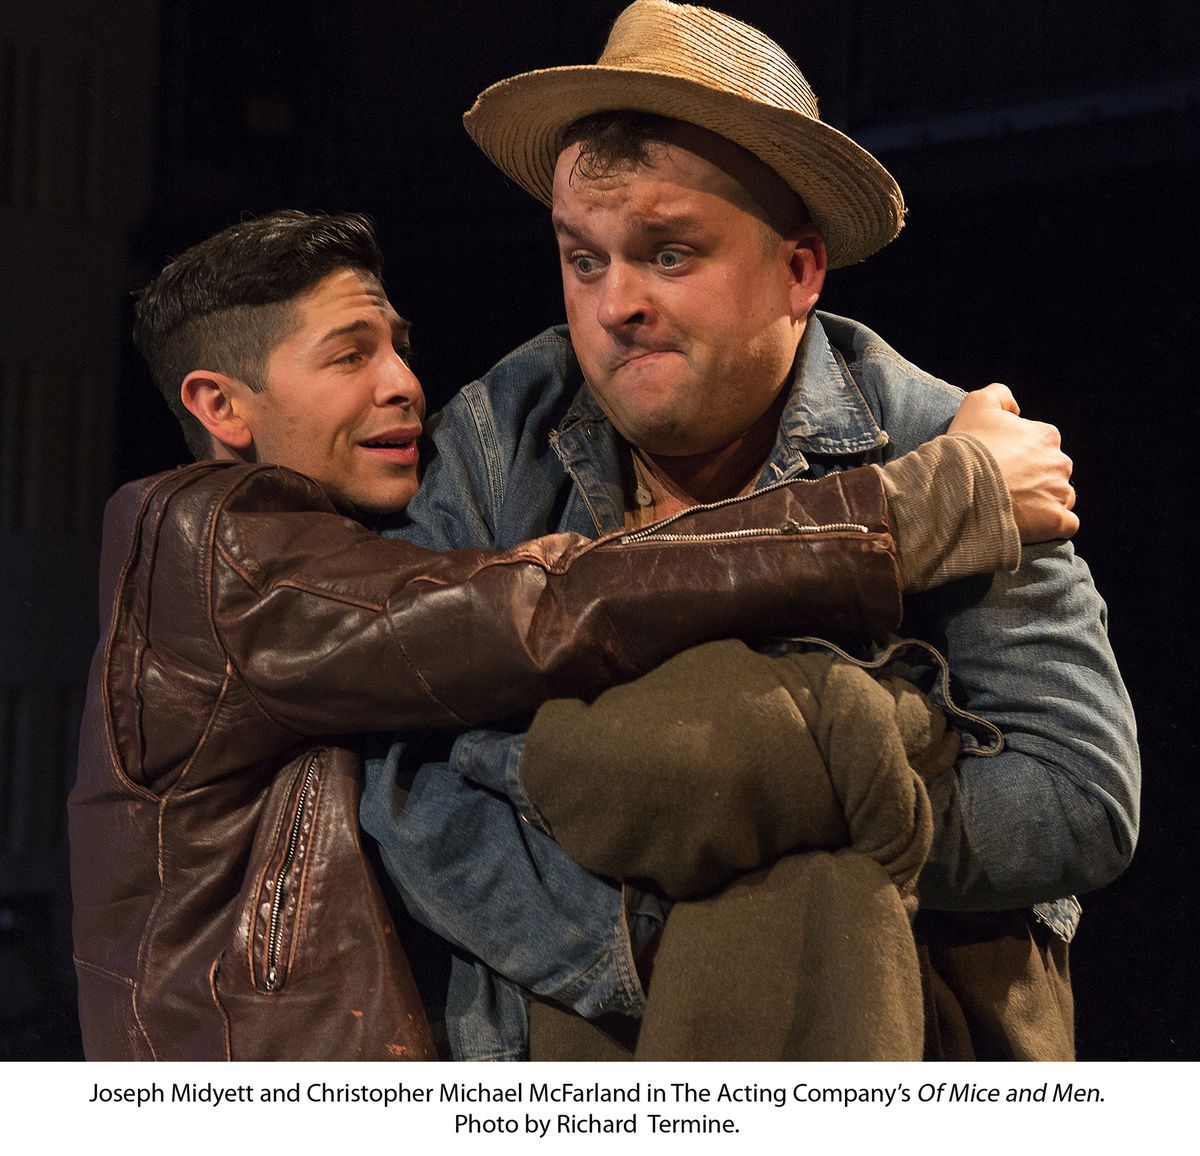 Joseph Midyett and Christopher Michael McFarland in The Acting Company’s “Of Mice and Men.”